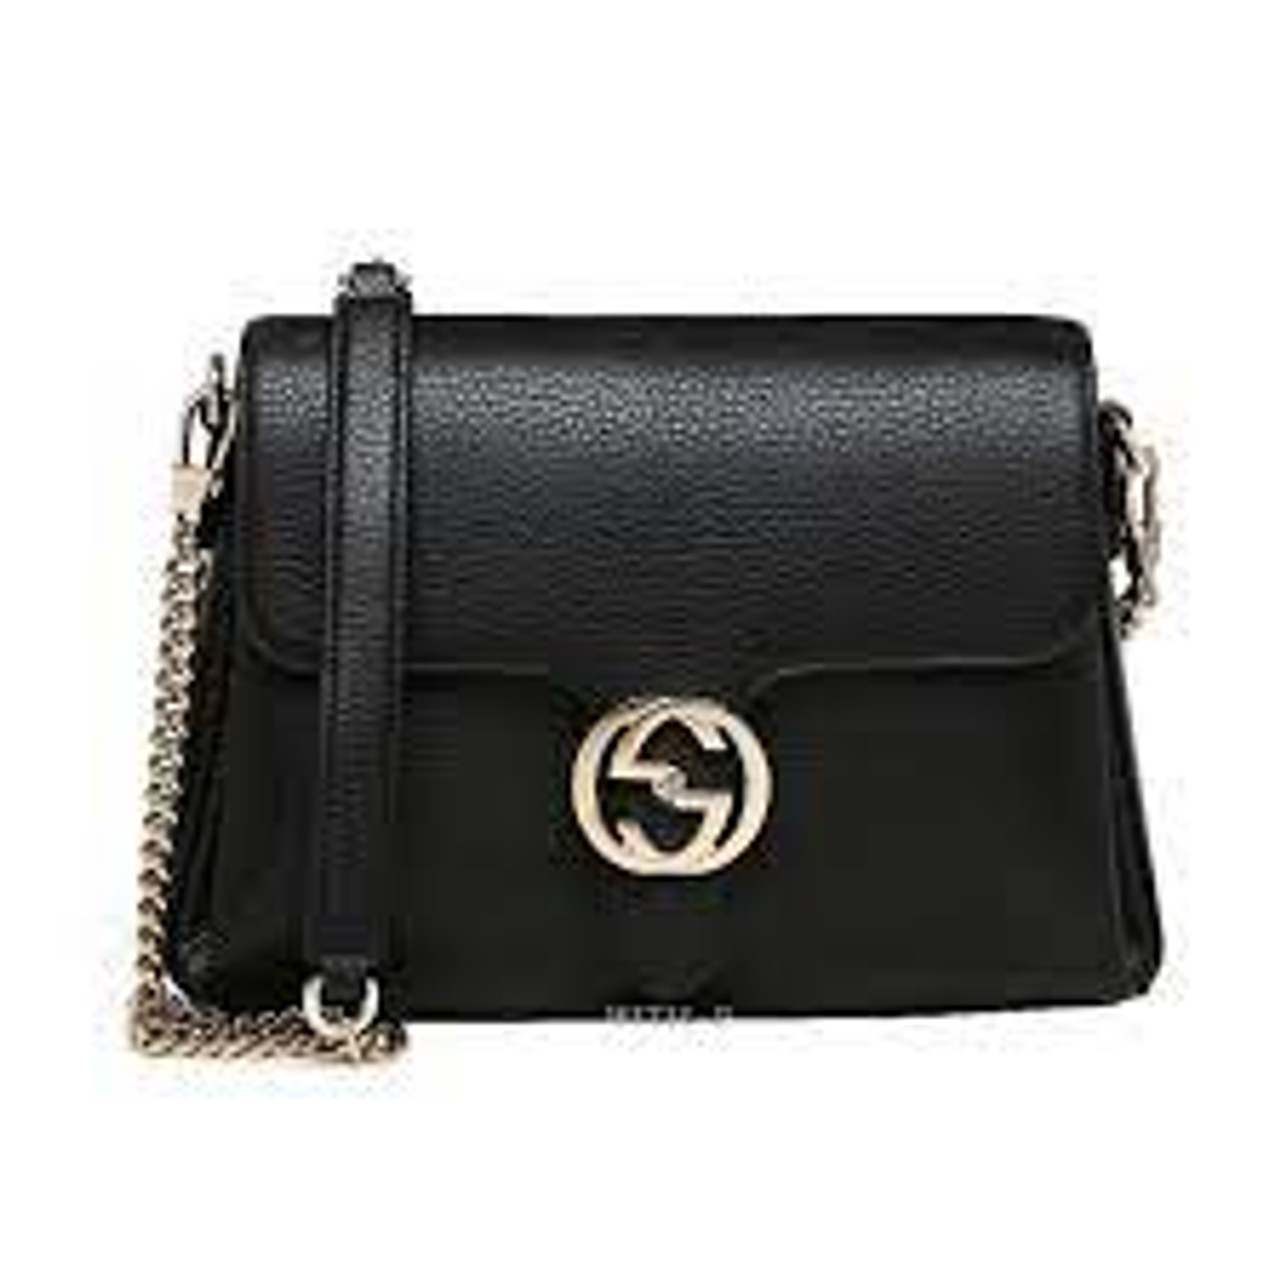 Soho leather crossbody bag Gucci Black in Leather - 38220944